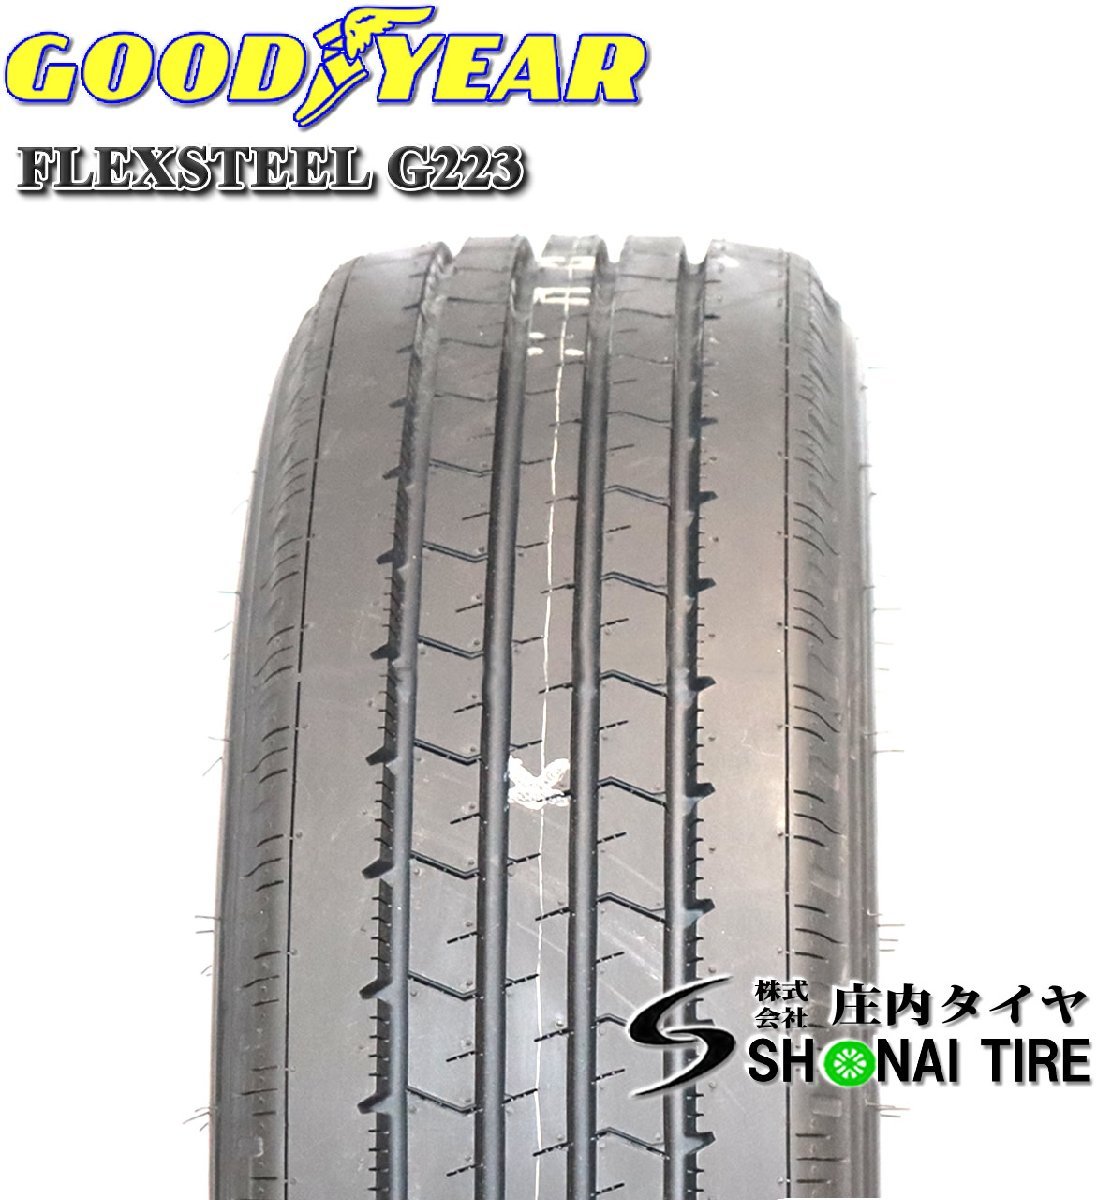  stock necessary verification Dyna for Goodyear FLEX STEEL G223 205/80R17.5 LT iron wheel attaching 17.5×5.25 +113 6ps.@ price summer NO,GY011SH363-6